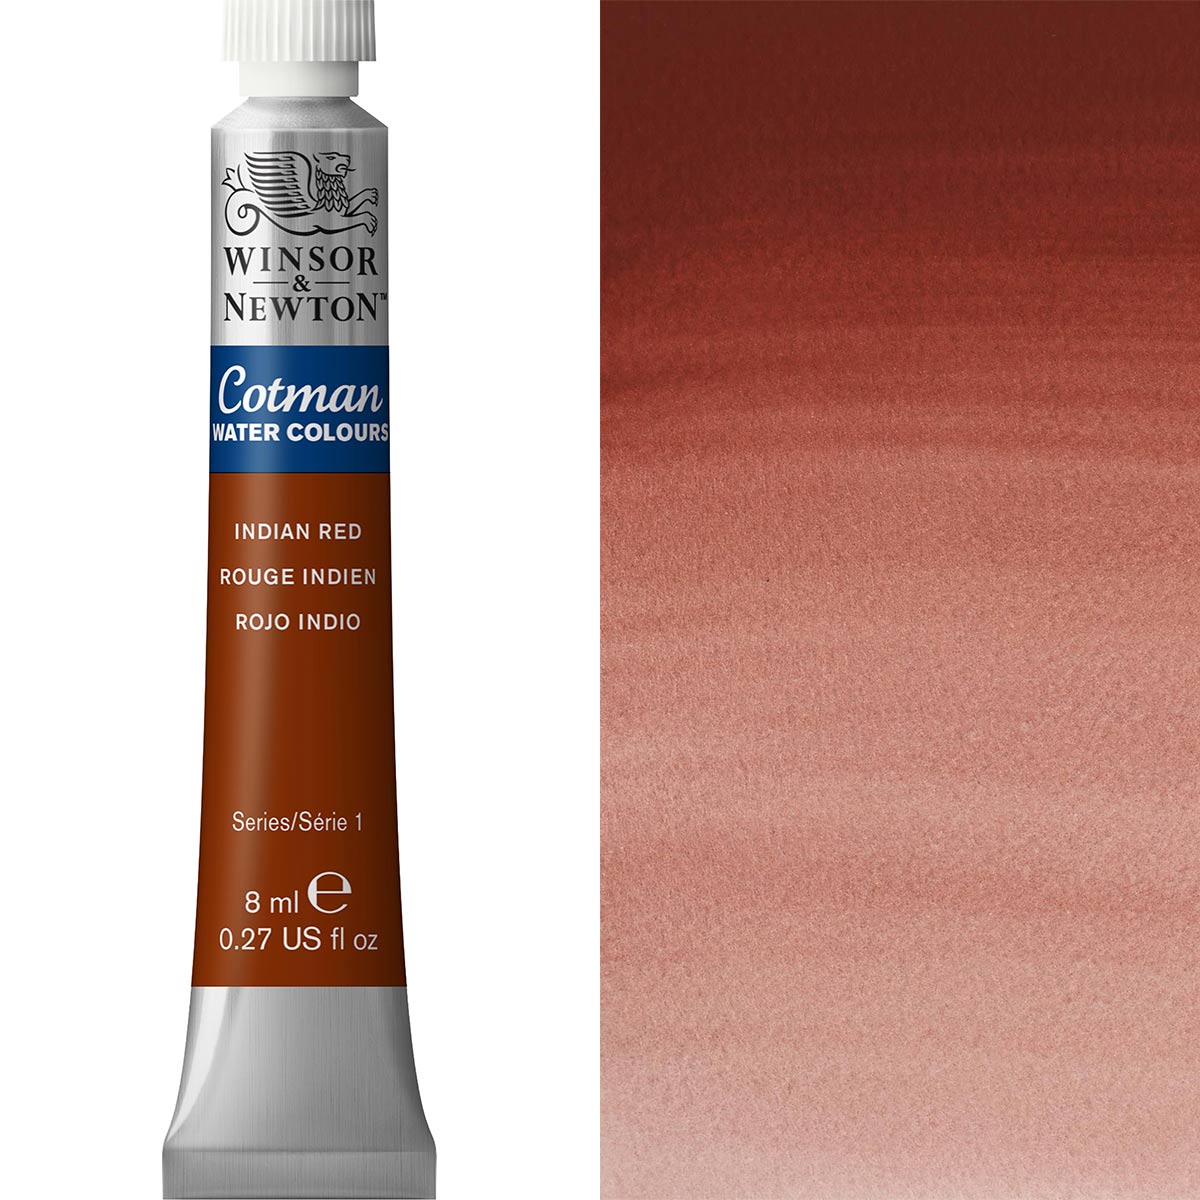 Winsor and Newton - Cotman Watercolour - 8ml - Indian Red